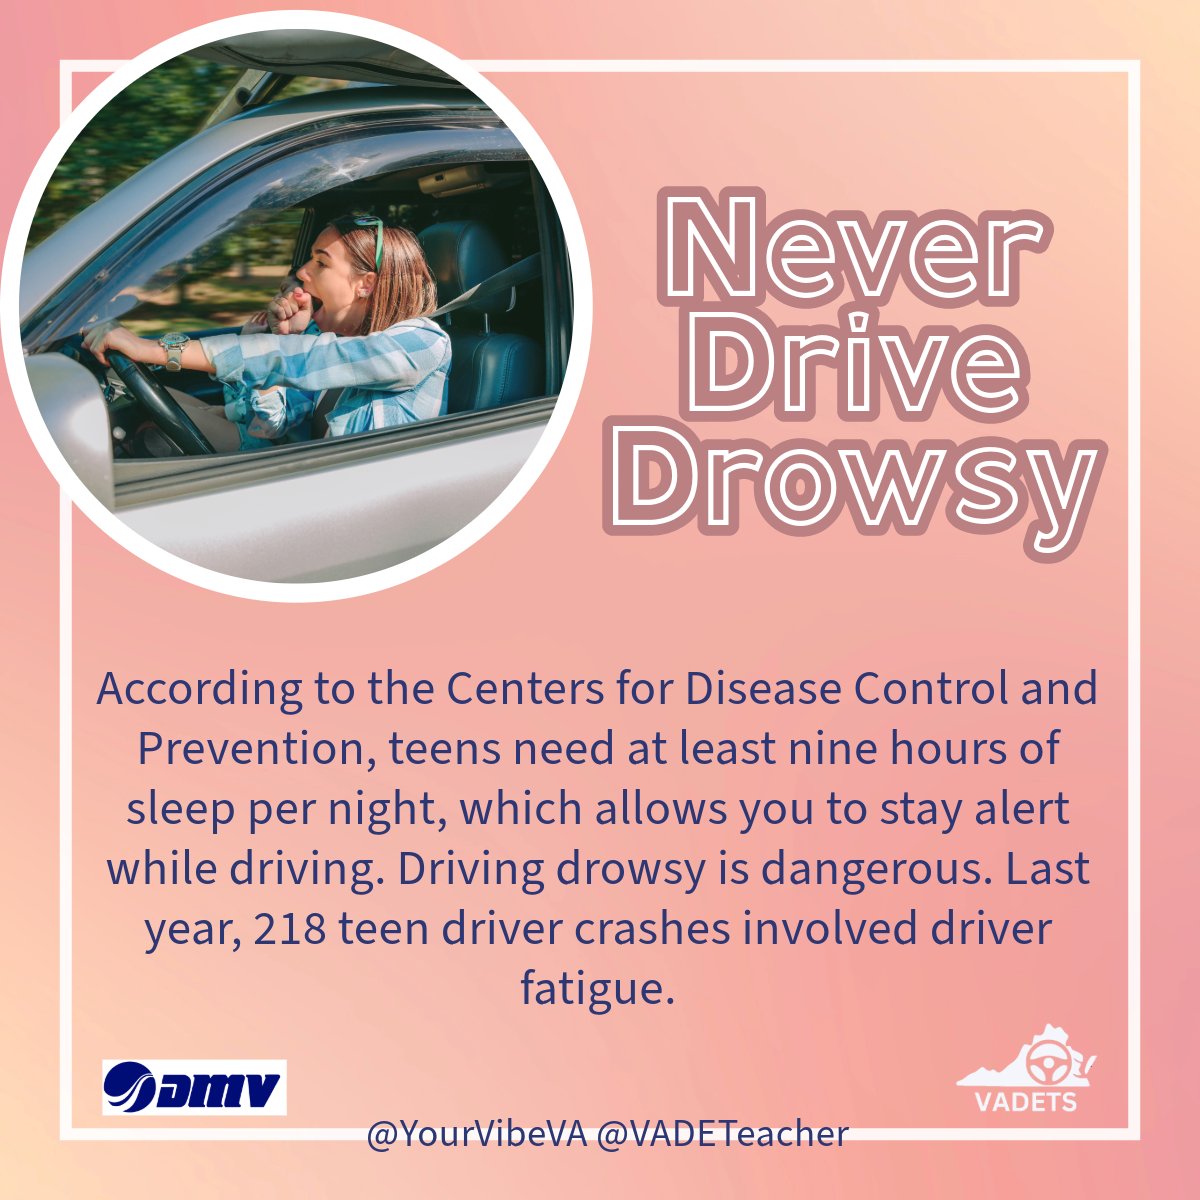 Never Drive Drowsy!
Teens need at least 9 hours of sleep per night, which allows you to stay alert while driving! Driving drowsy is dangerous.
#MySpringVibe #ArriveAlive